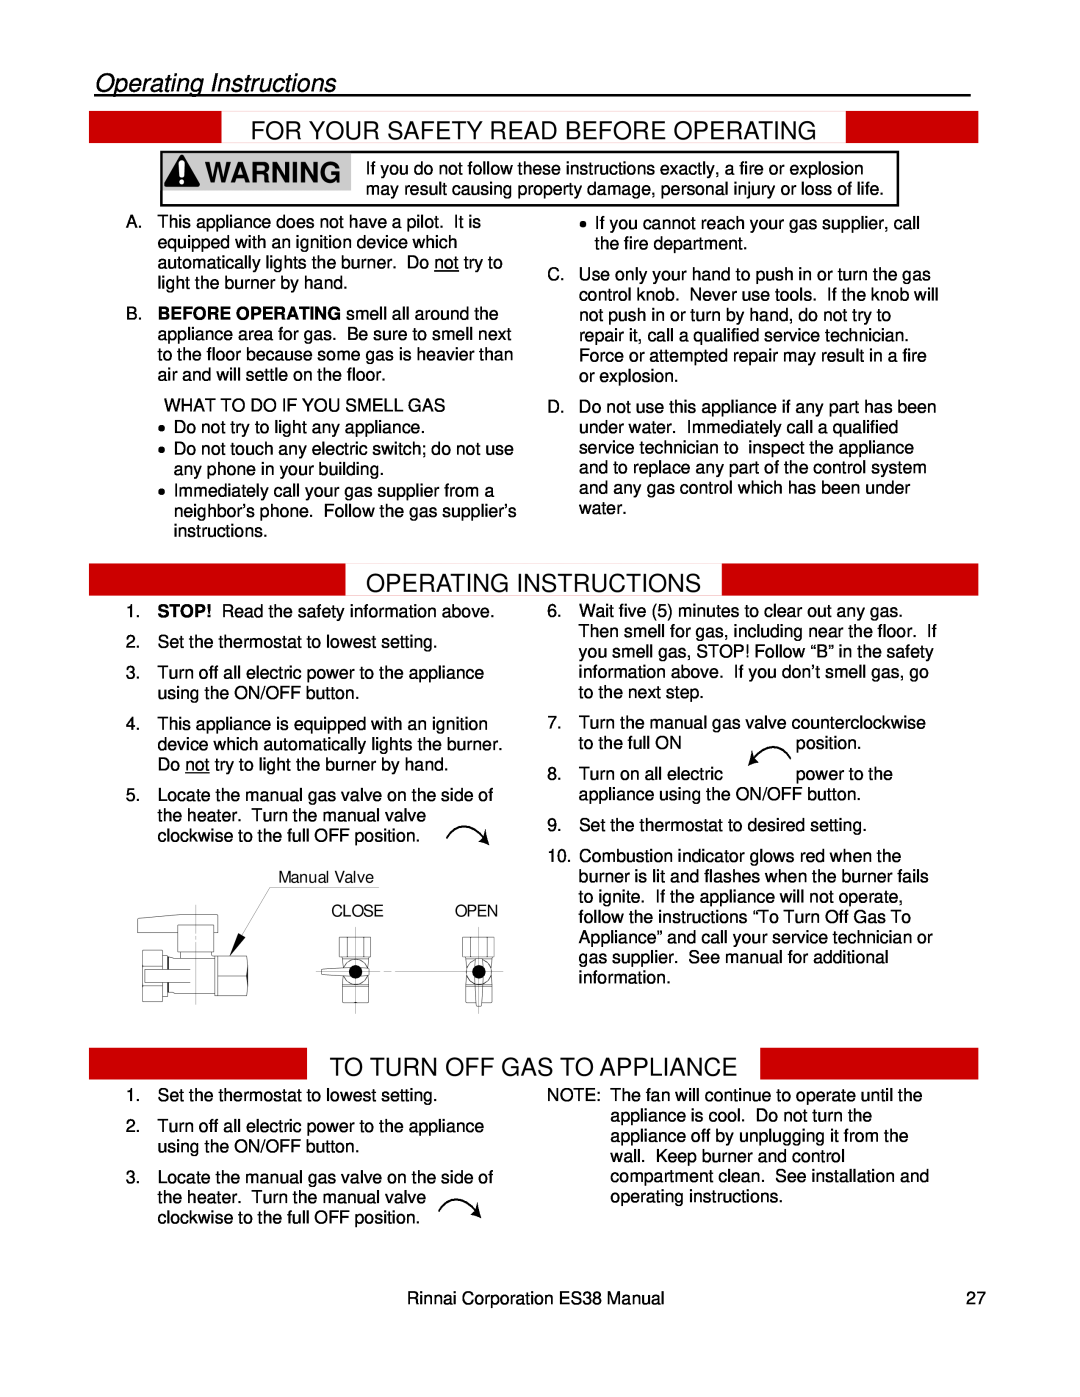 Rinnai ES38 installation manual Operating Instructions, For Your Safety Read Before Operating, To Turn Off Gas To Appliance 